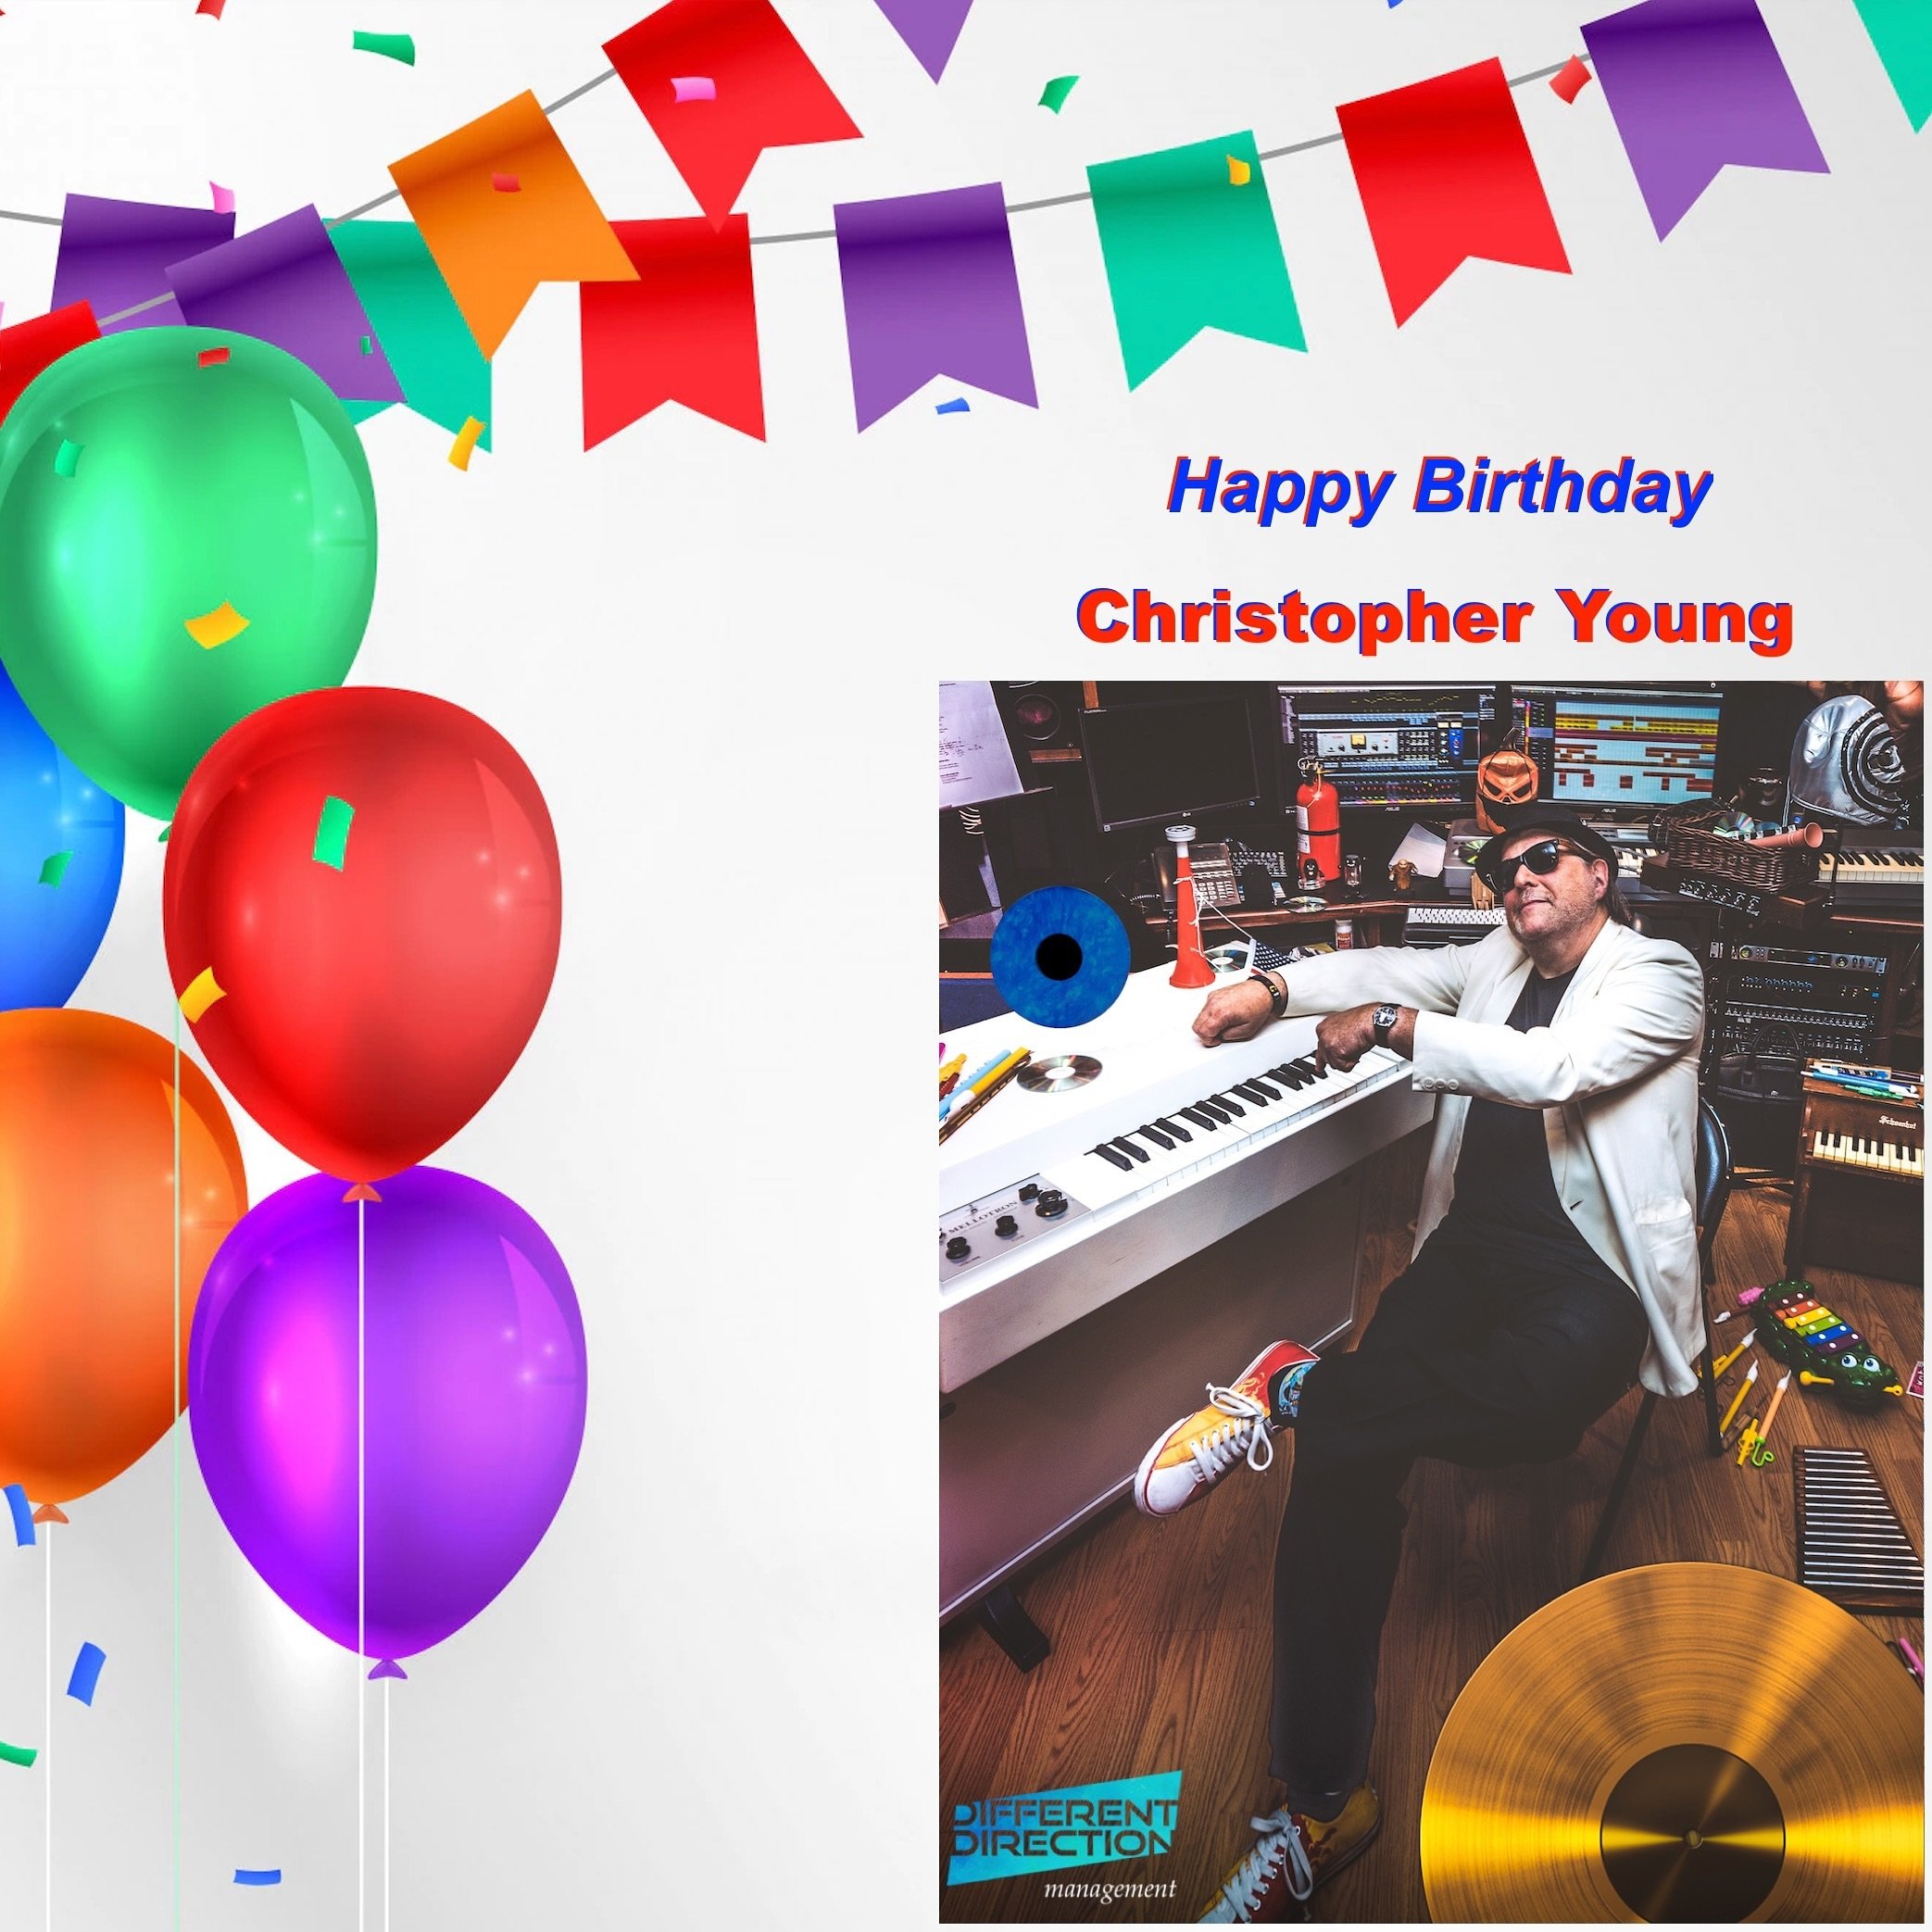 Please help us wish our Emmy &amp; Golden Globe nominated &amp; BMI winning client and friend, Christopher Young, a very happy birthday! His most recent release was the International Film Music Critics Association (IFMCA) award-wining score from THE 